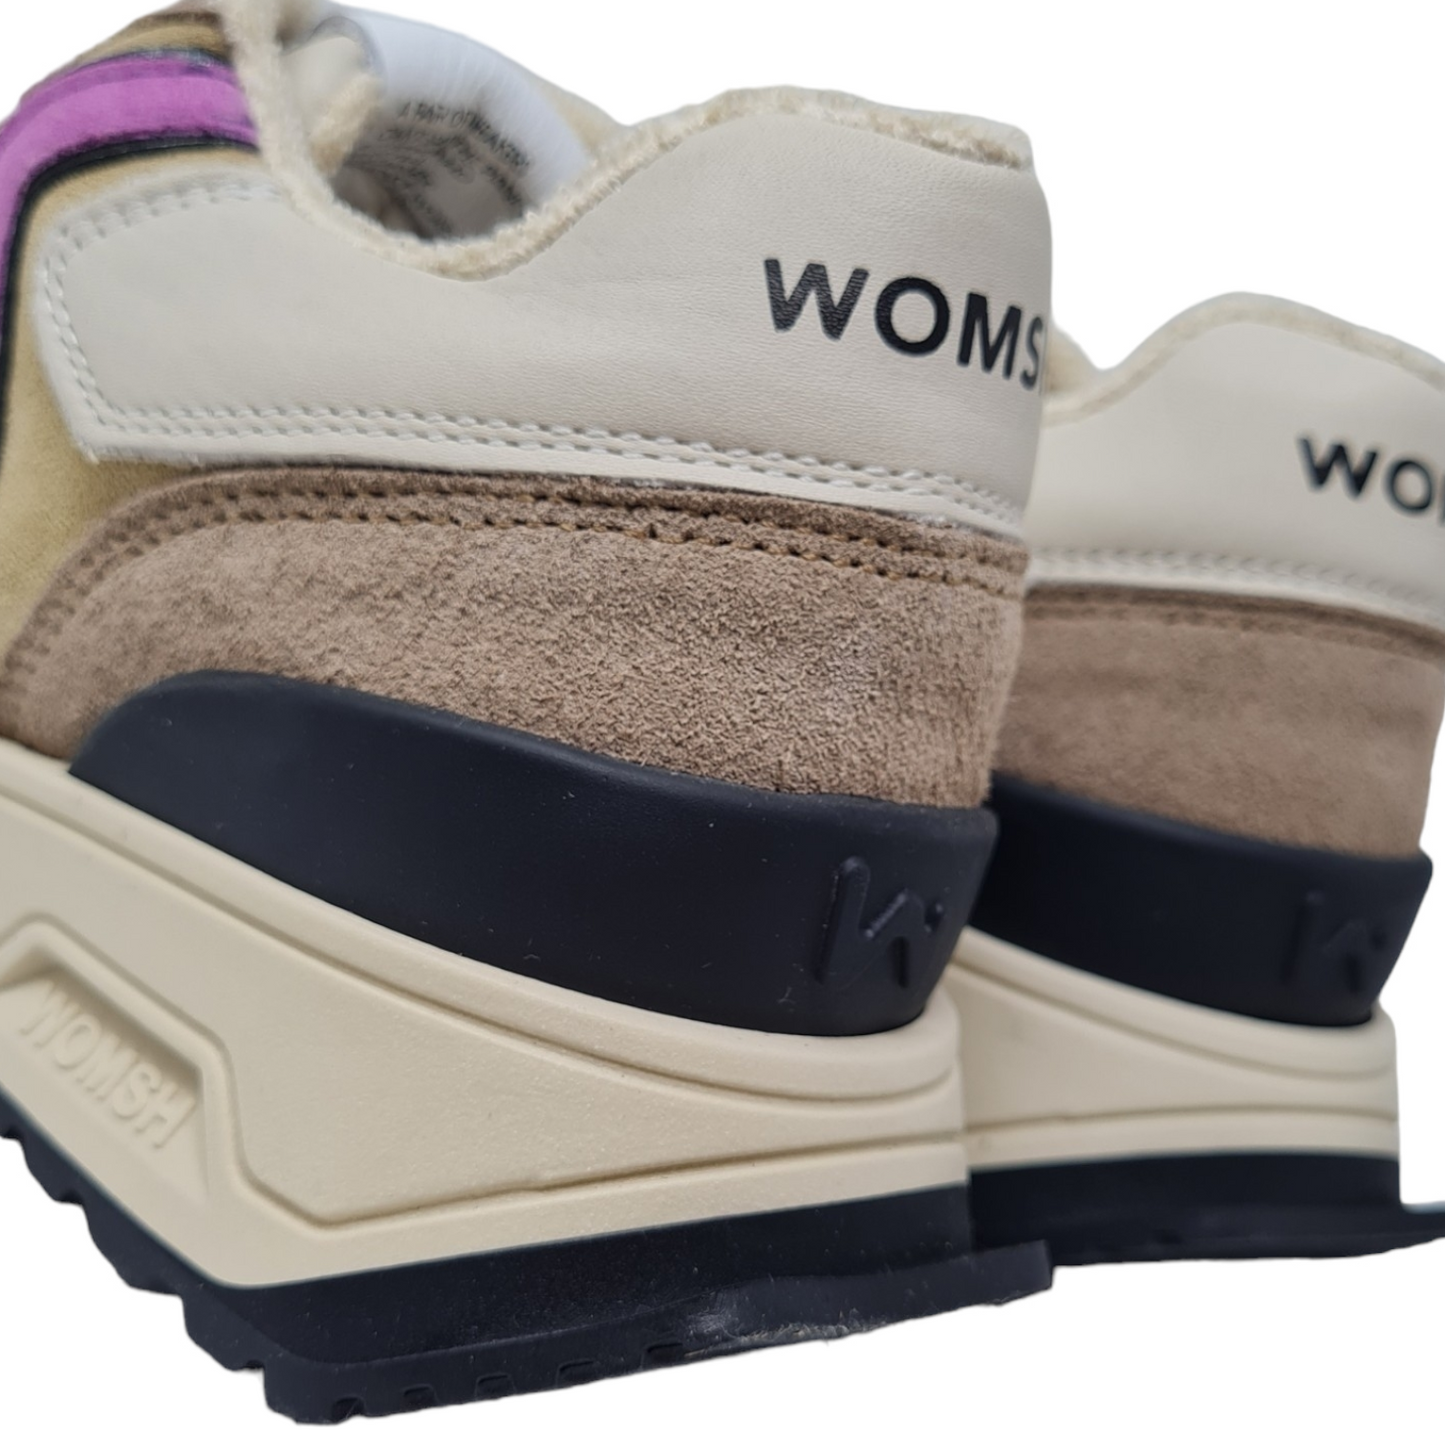 Wise WI018 sneakers